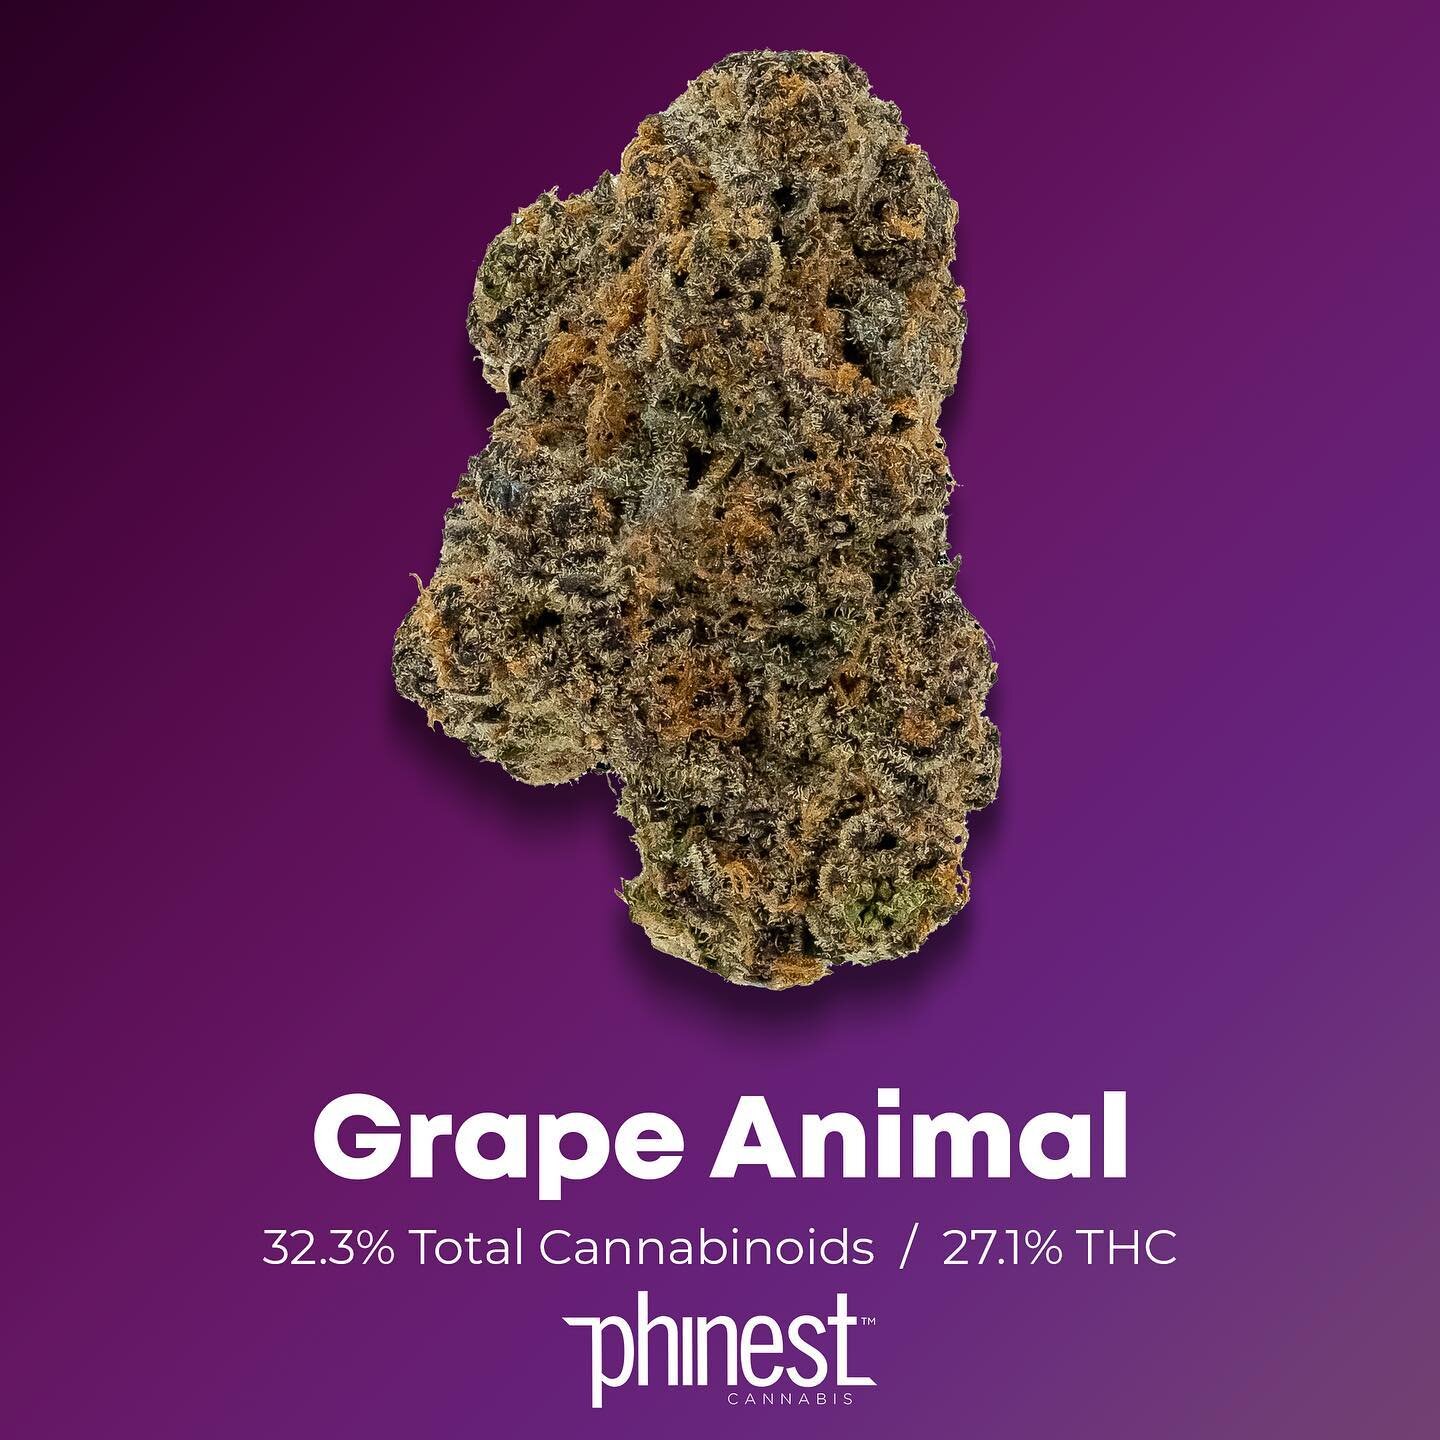 Fight off the Monday Blues with Grape Animals 🍇

Bred by Mr. Cannarado himself @cannaradopnw, Grape Animals is an Indica-dominant cross of Grape Pie and Animal Cookies boasting silvery-violet nugs laden with trichomes. Soothing &amp; relaxing effect